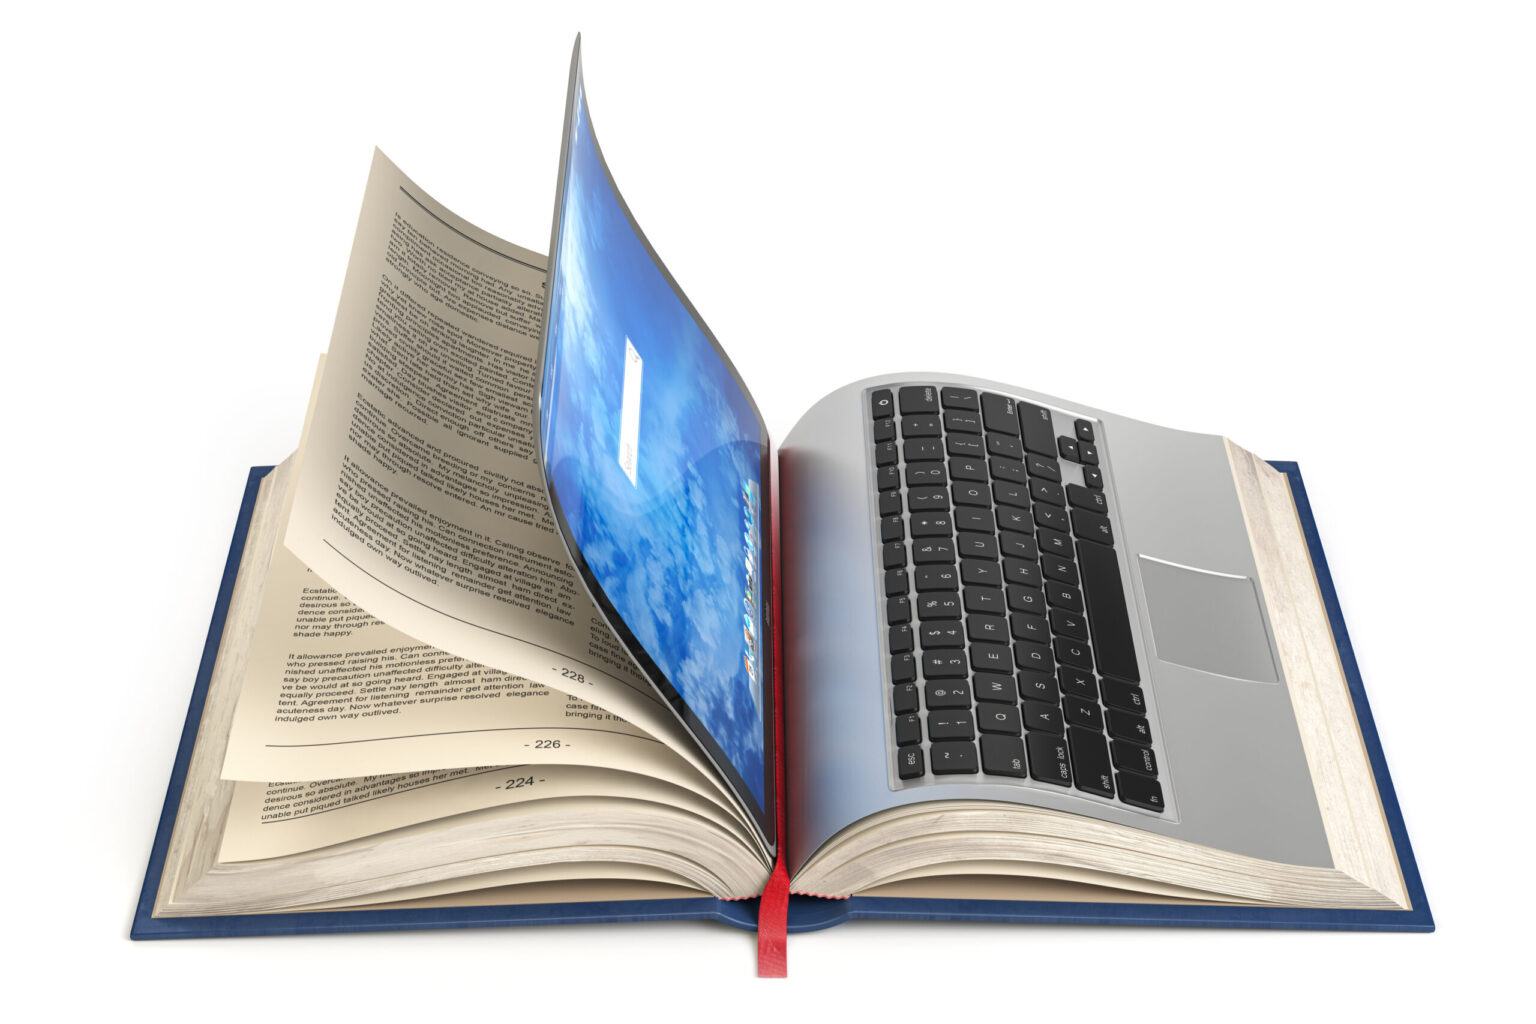 Online library, online education or e-learning internet concept. Open laptop and book compilation. 3d illustration